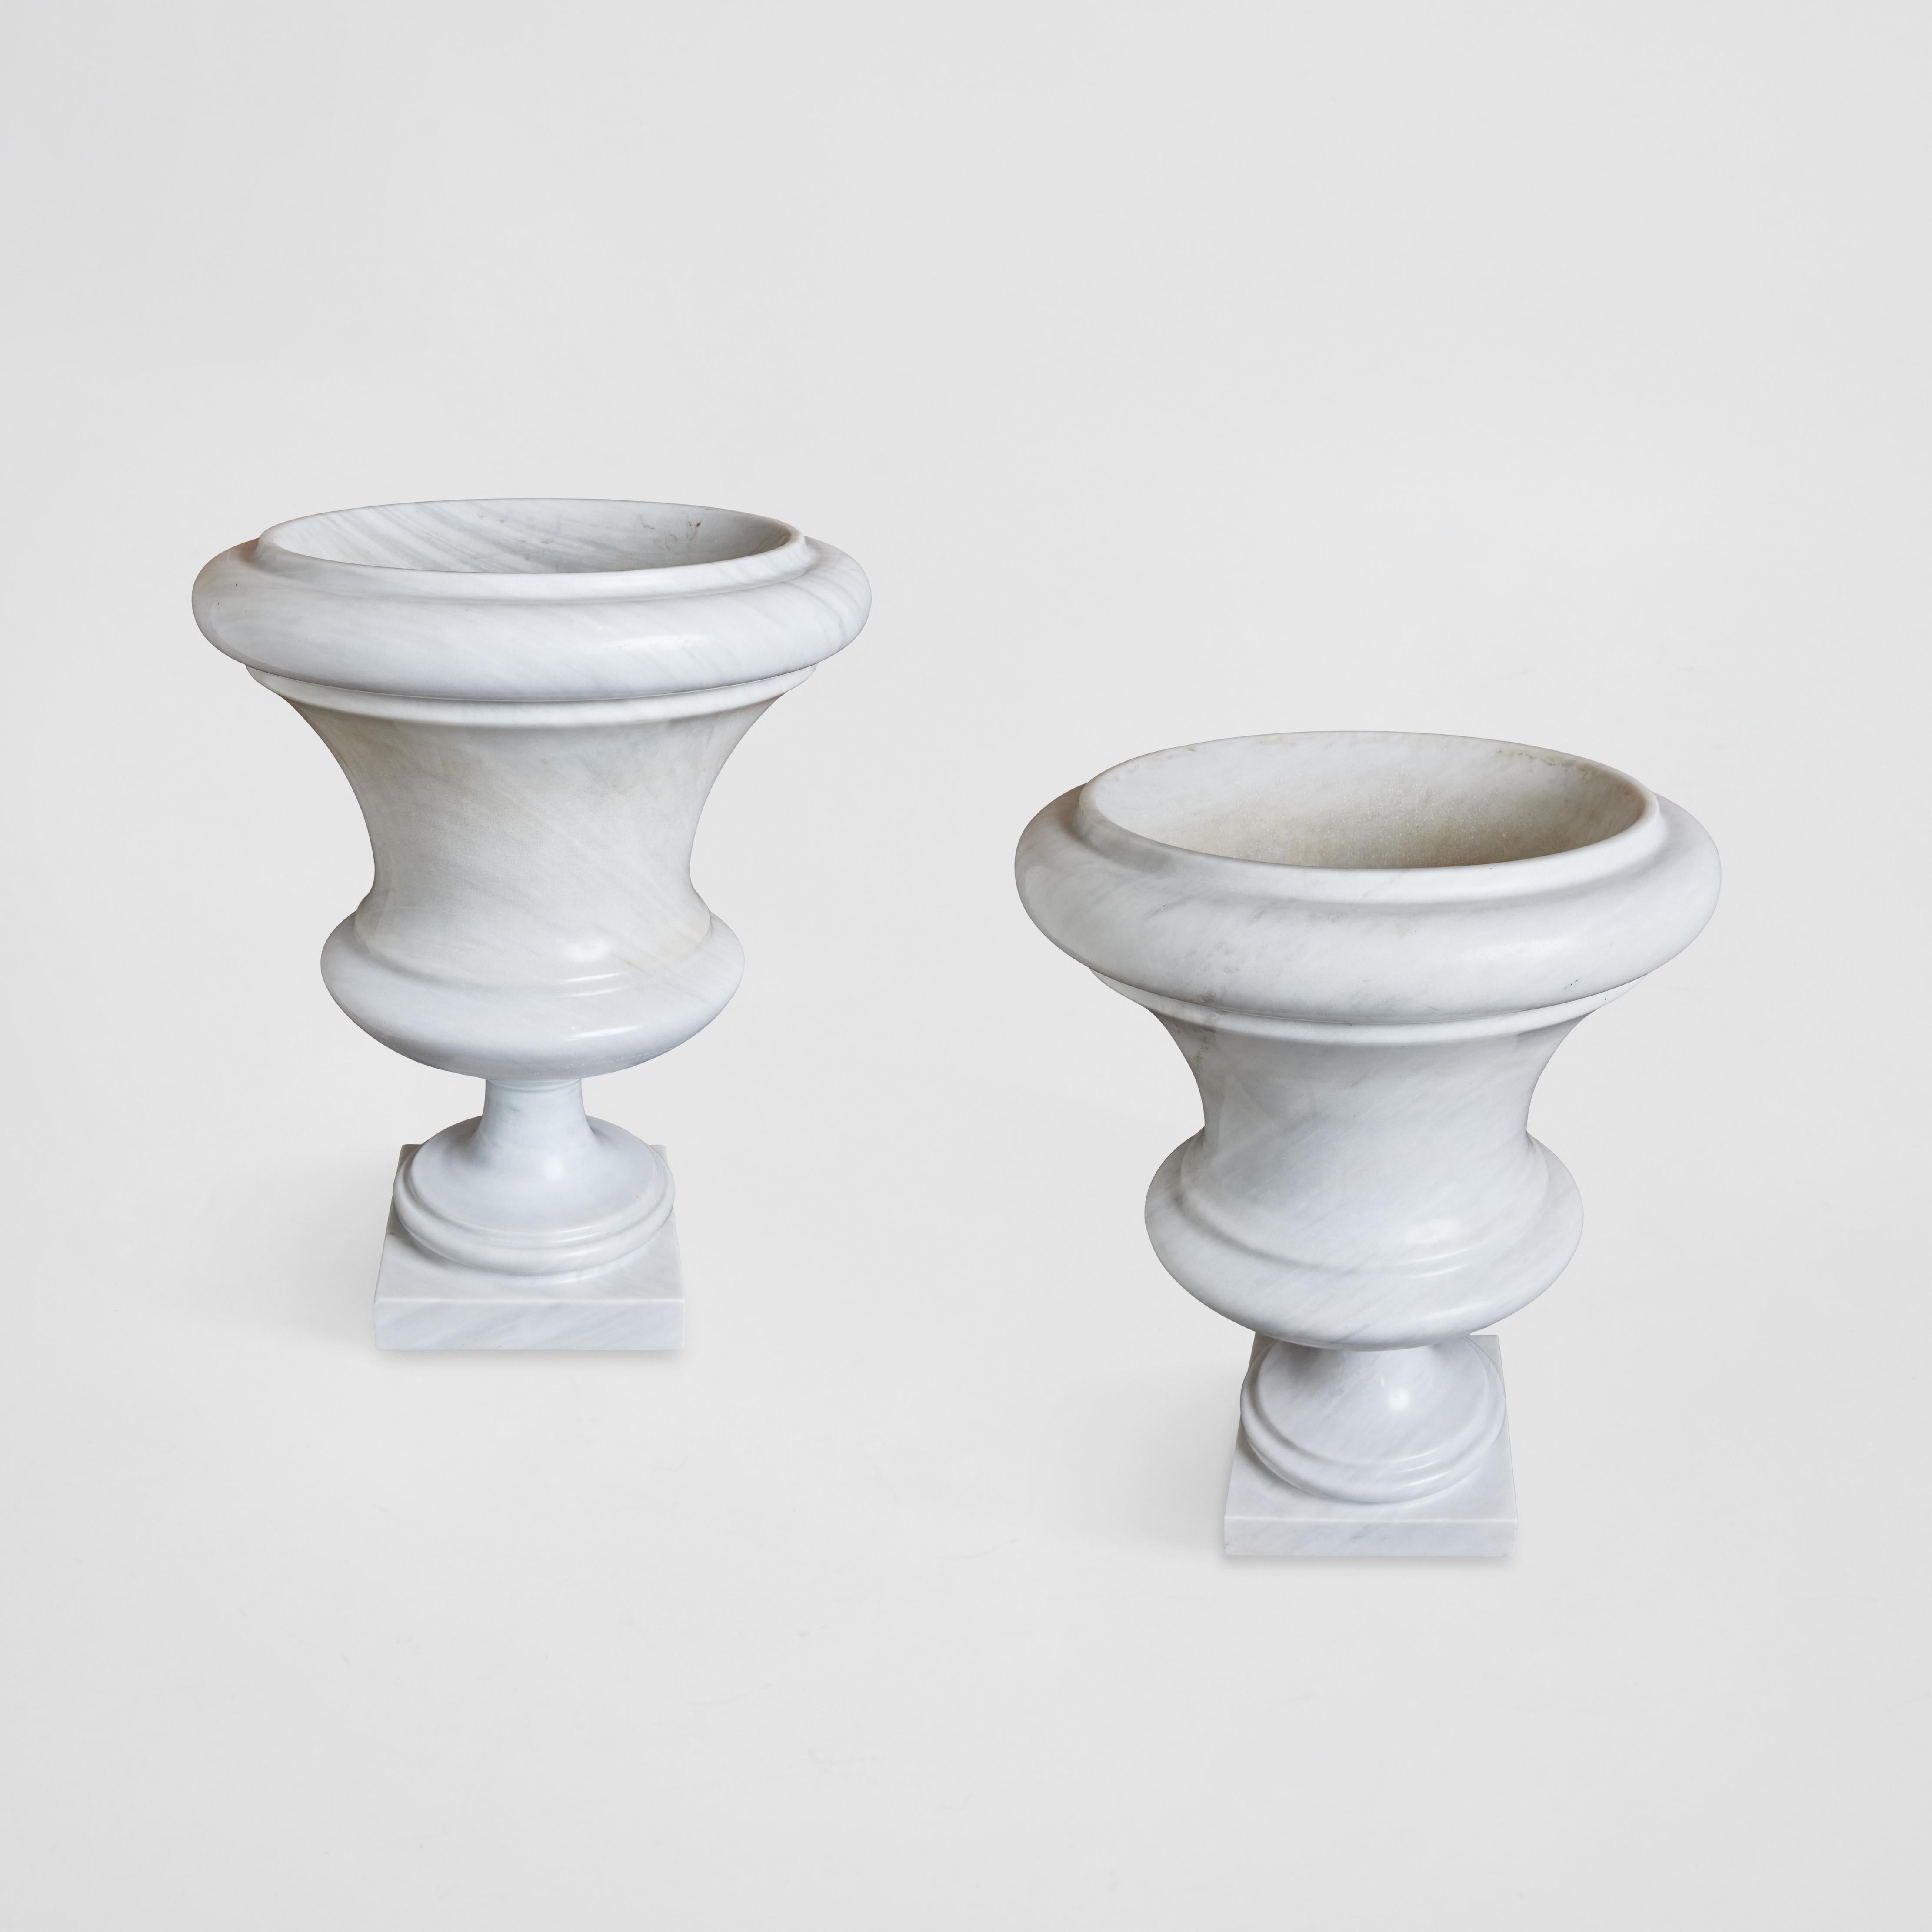 Large scale pair of classic white carrara urns.  These urns can be used either indoor or outdoor. They would be wonderful on their own, planted or filled with white orchids.